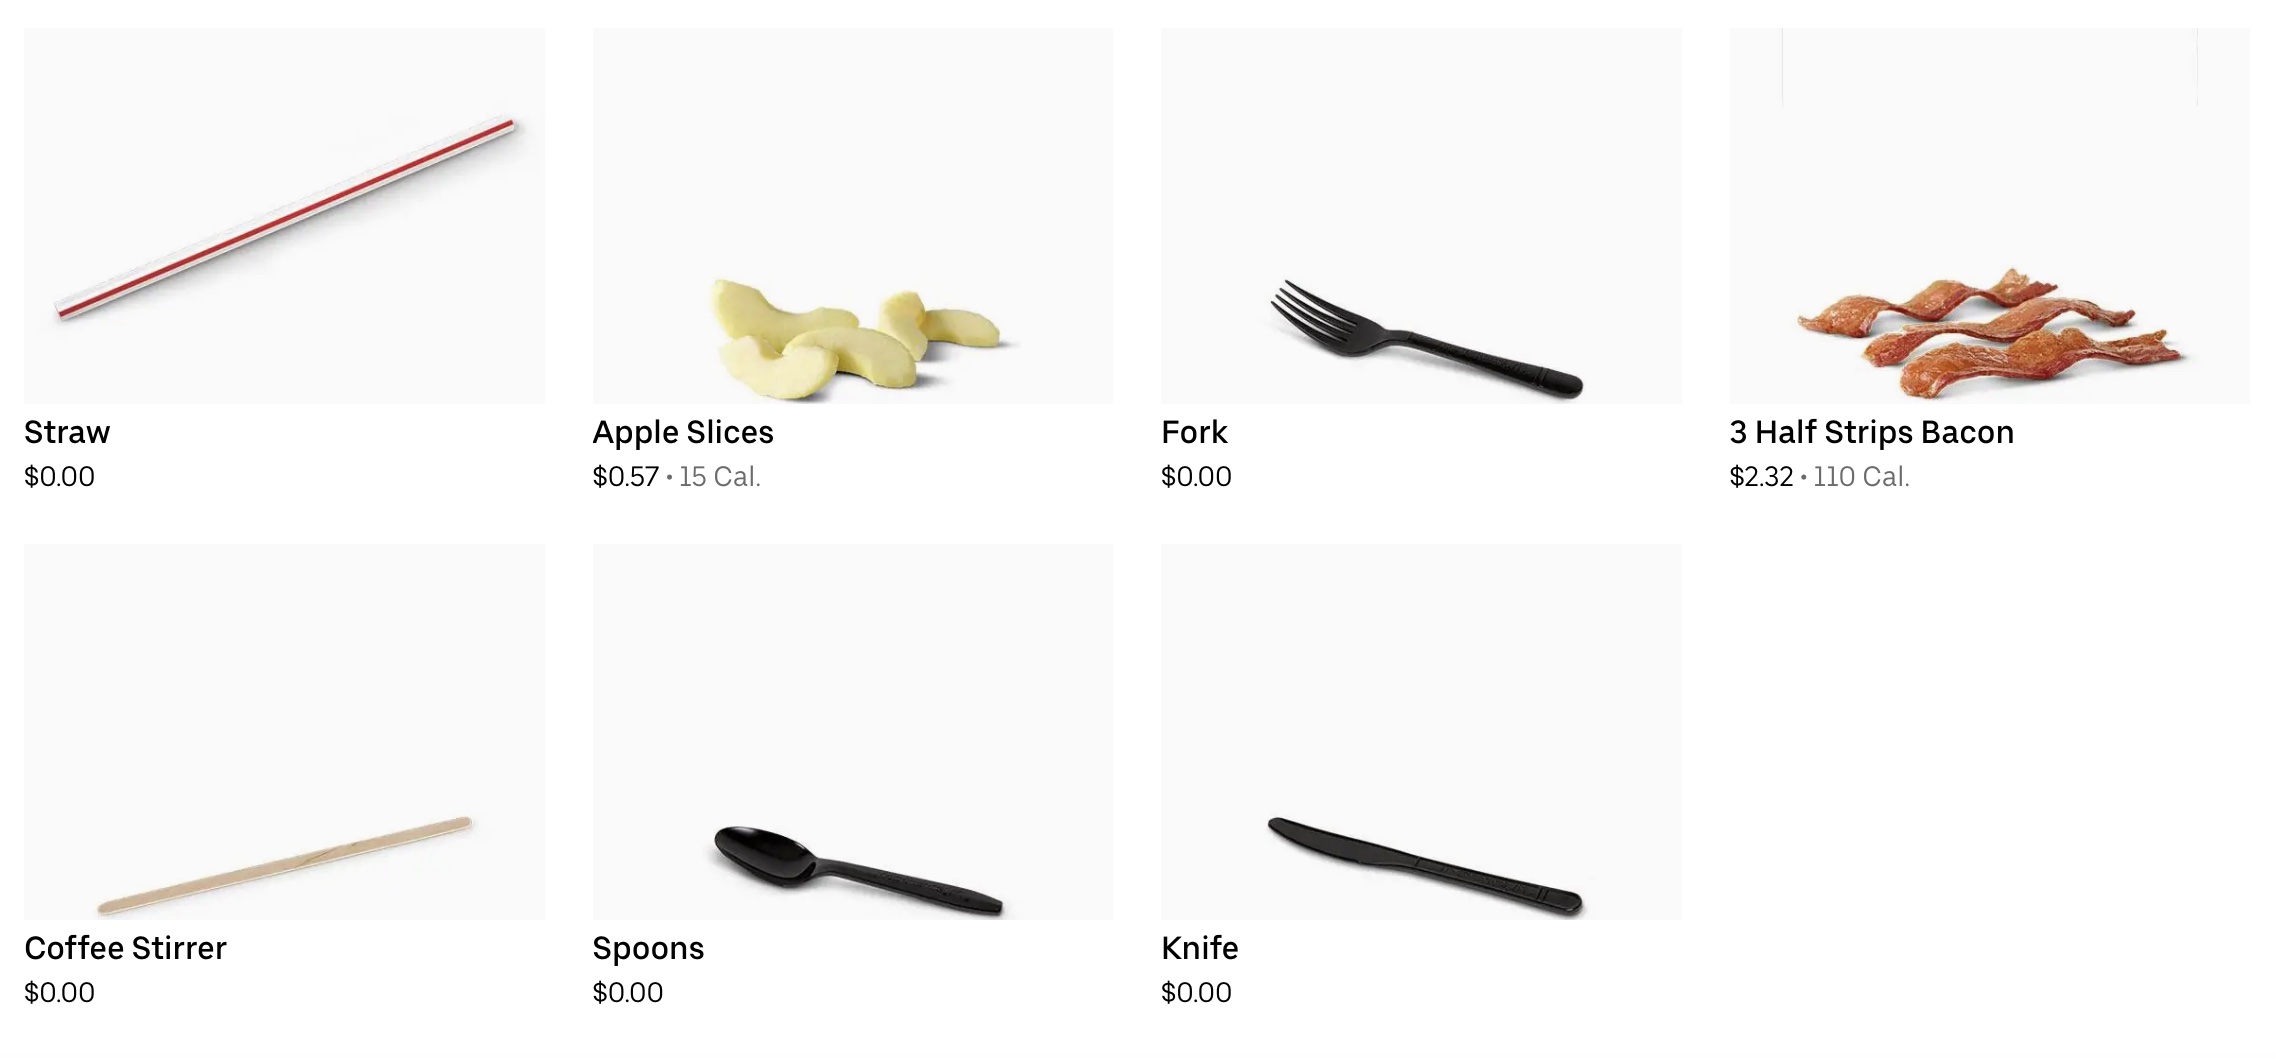 A list of different types of spoons from McDonald's dollar menu.